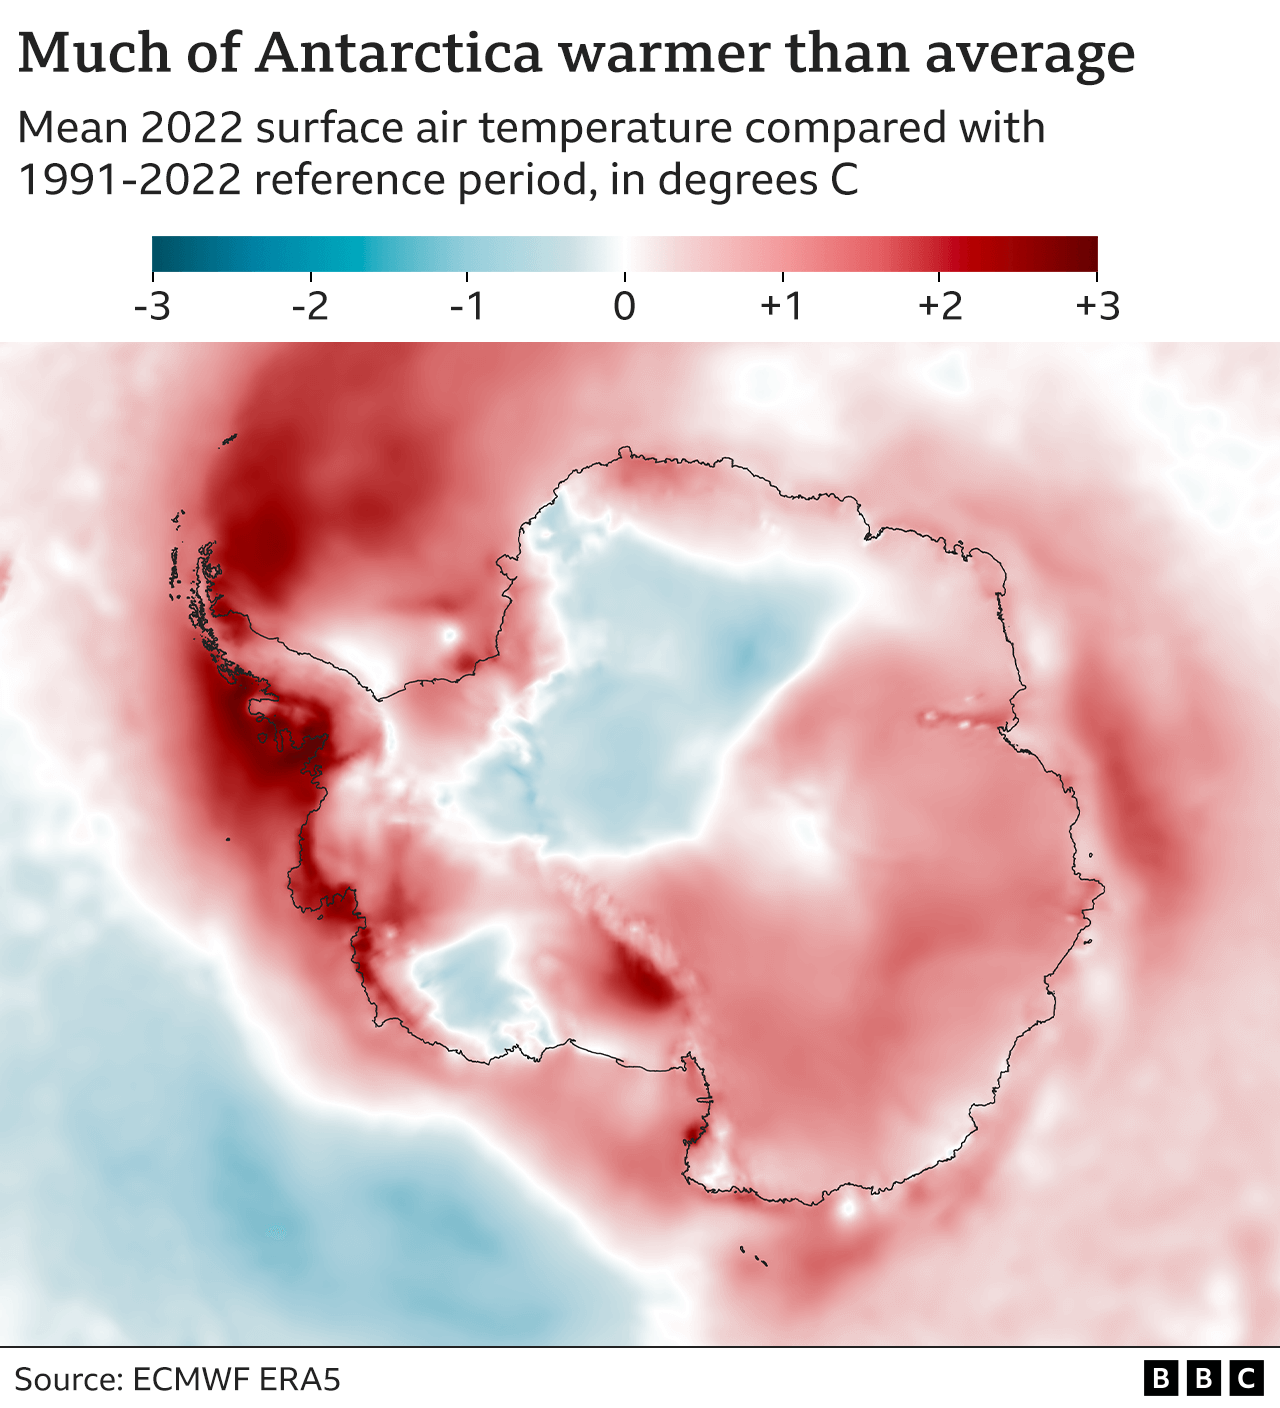 Map of Antarctica with colour shading to represent the difference between the average surface air temperature in 2022 and the average temperature during the reference period 1991-2020. Aside from two colder blue patches, the continent is mostly red -- about 1 degree above average. Areas over the peninsula are a dark red, up to 3 degrees above average.